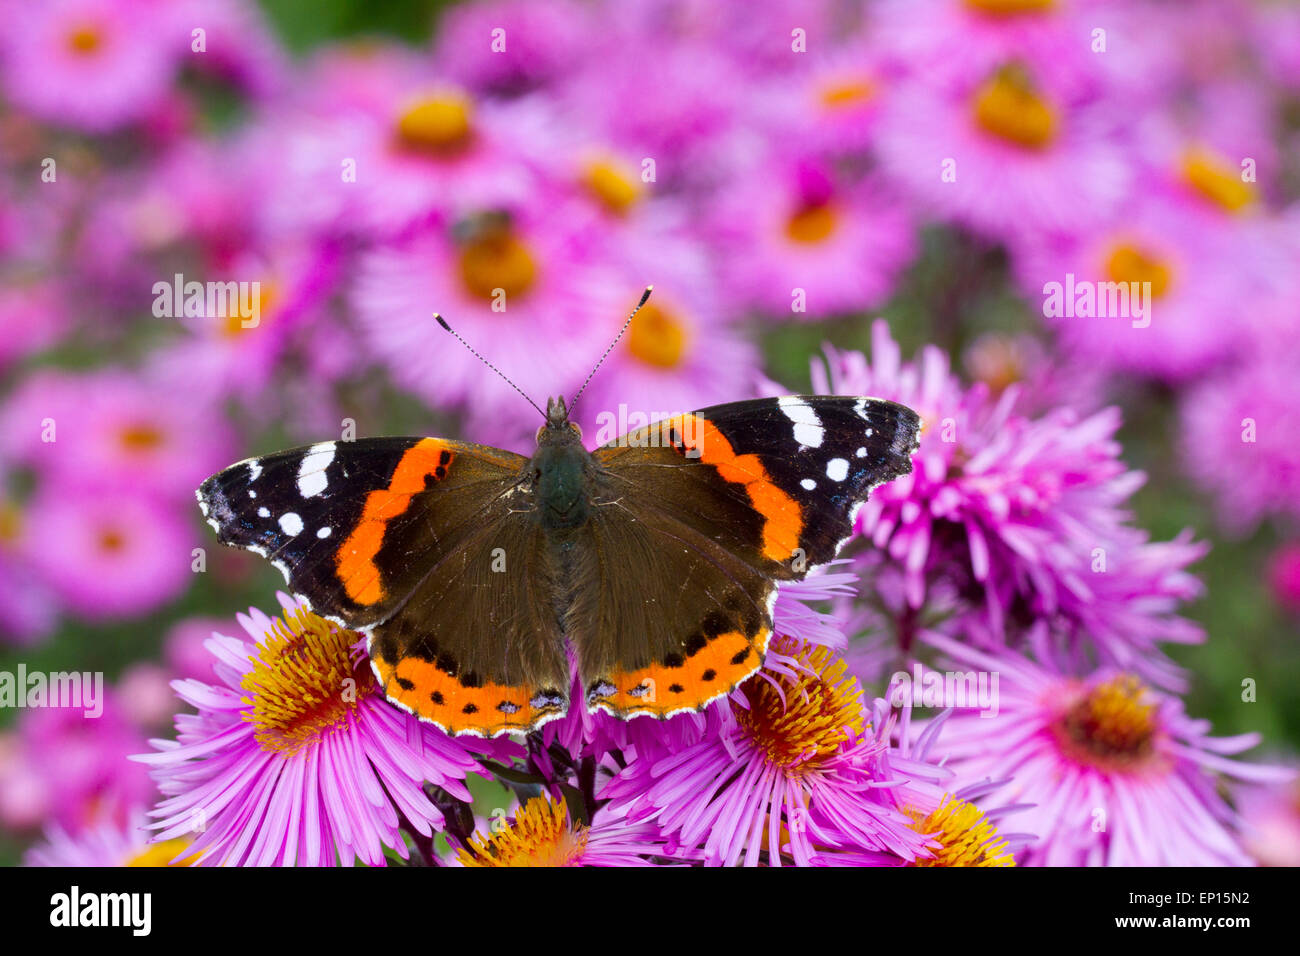 Red Admiral Butterfly (Vanessa atalanta) adult feeding on Michealmas Daisy (Aster sp.) flowers in garden, Powys, Wales. Stock Photo